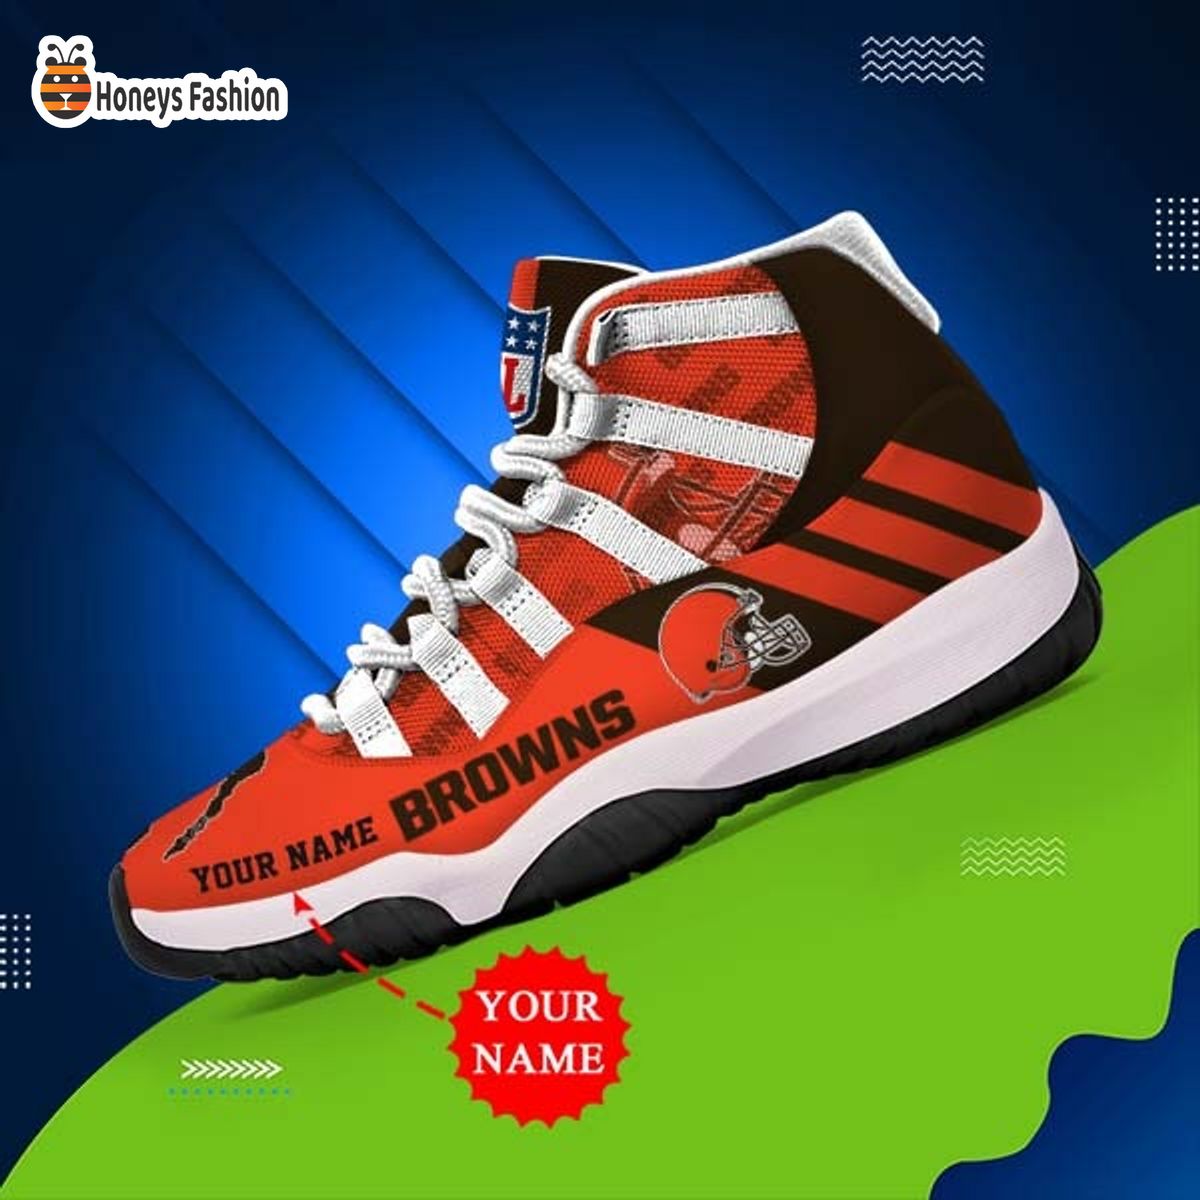 Cleveland Browns NFL Adidas Personalized Air Jordan 11 Shoes